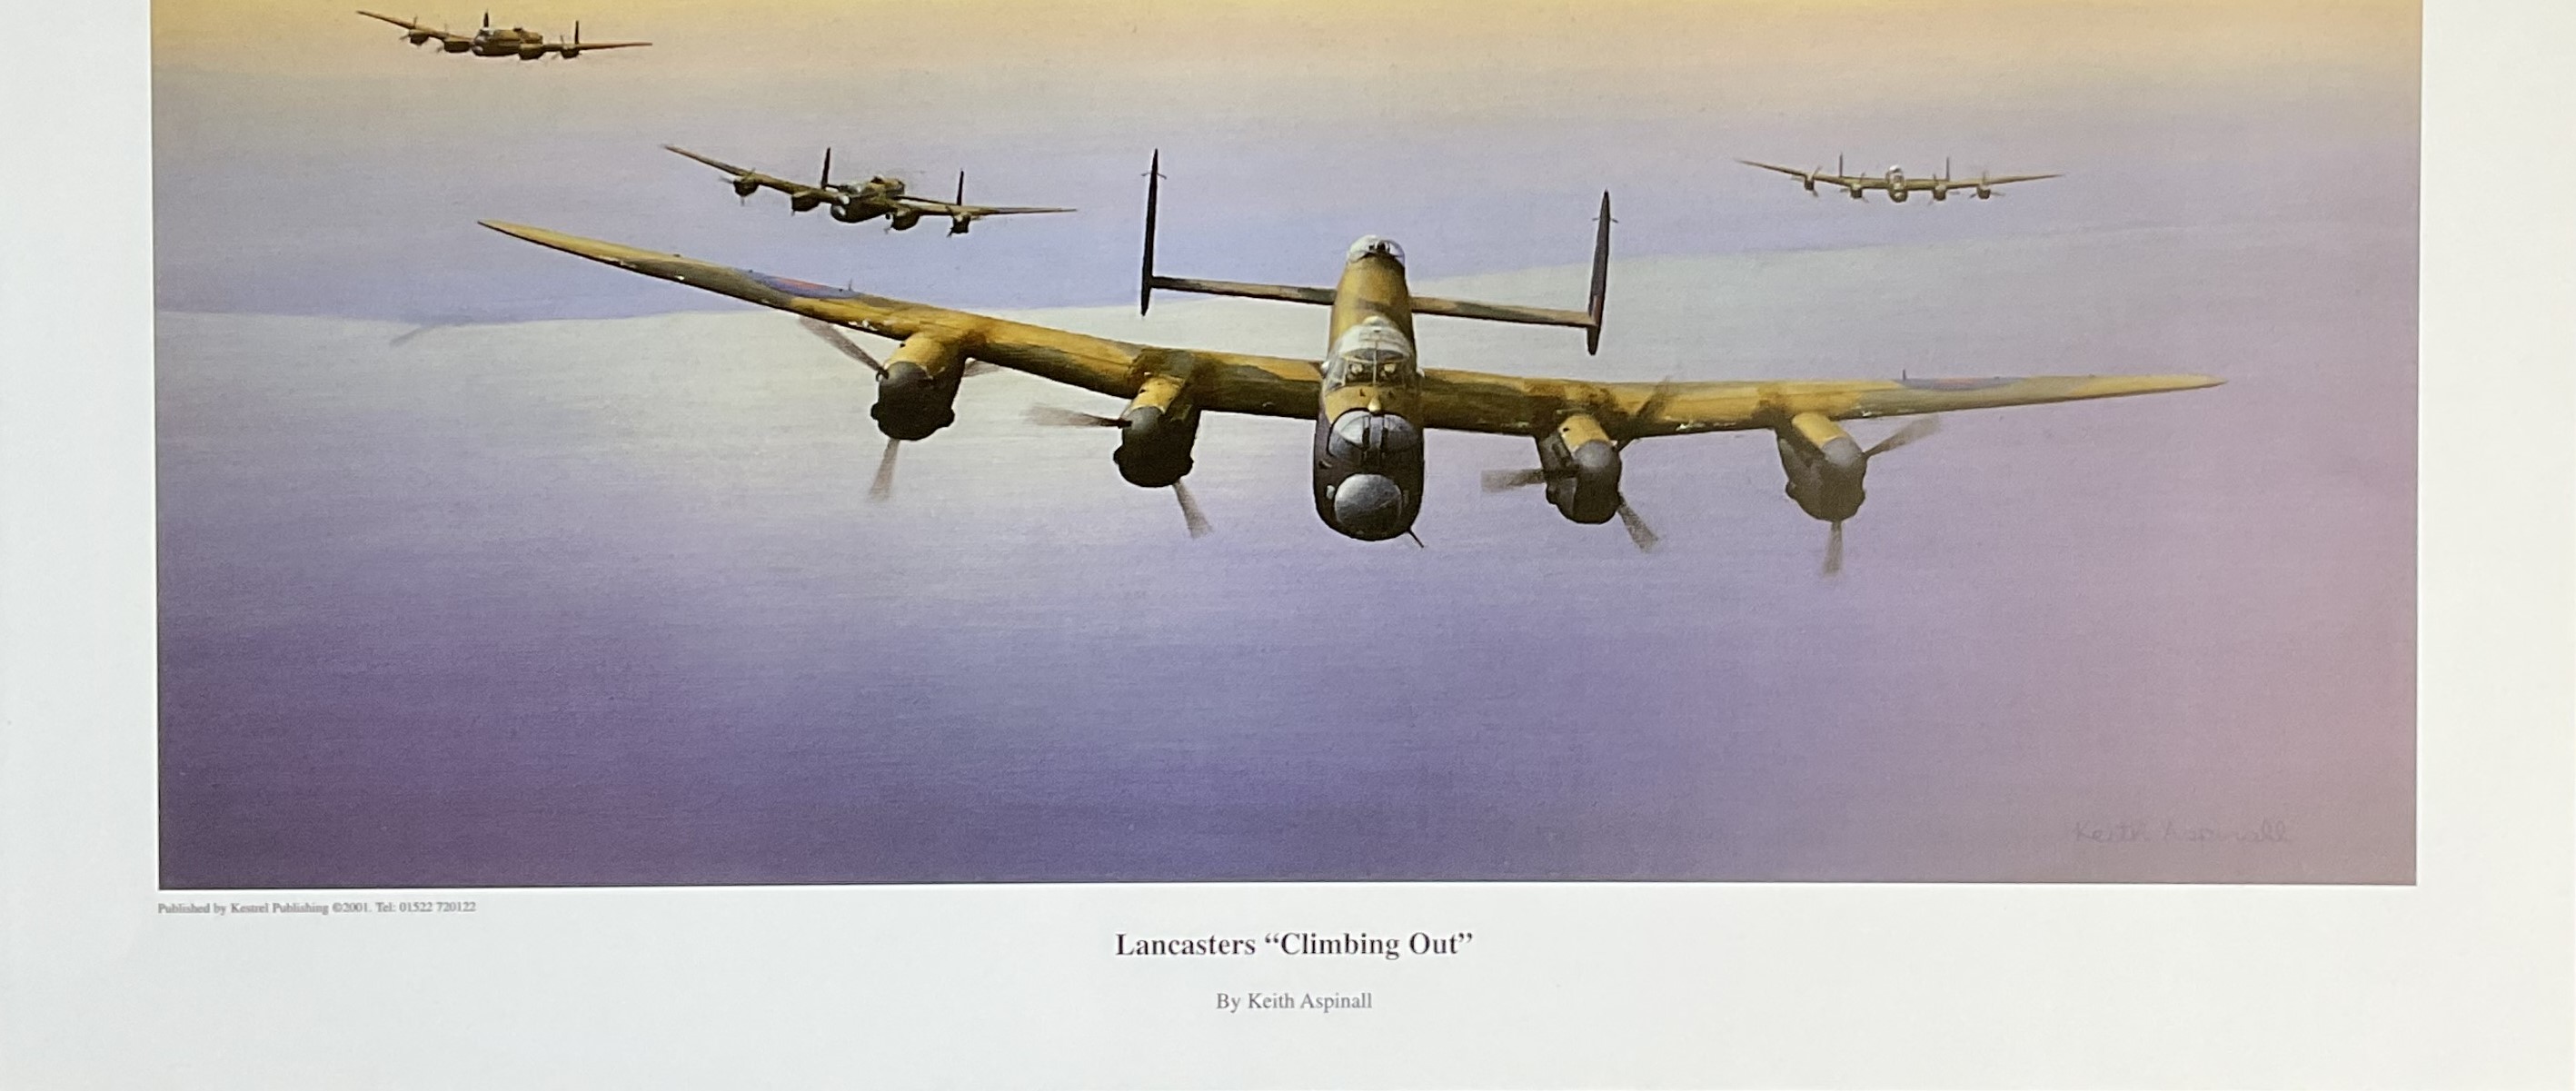 WW2 Colour Print Titled Lancasters Climbing Out by Keith Aspinall. Measures 16x12 inches appx. - Image 6 of 6